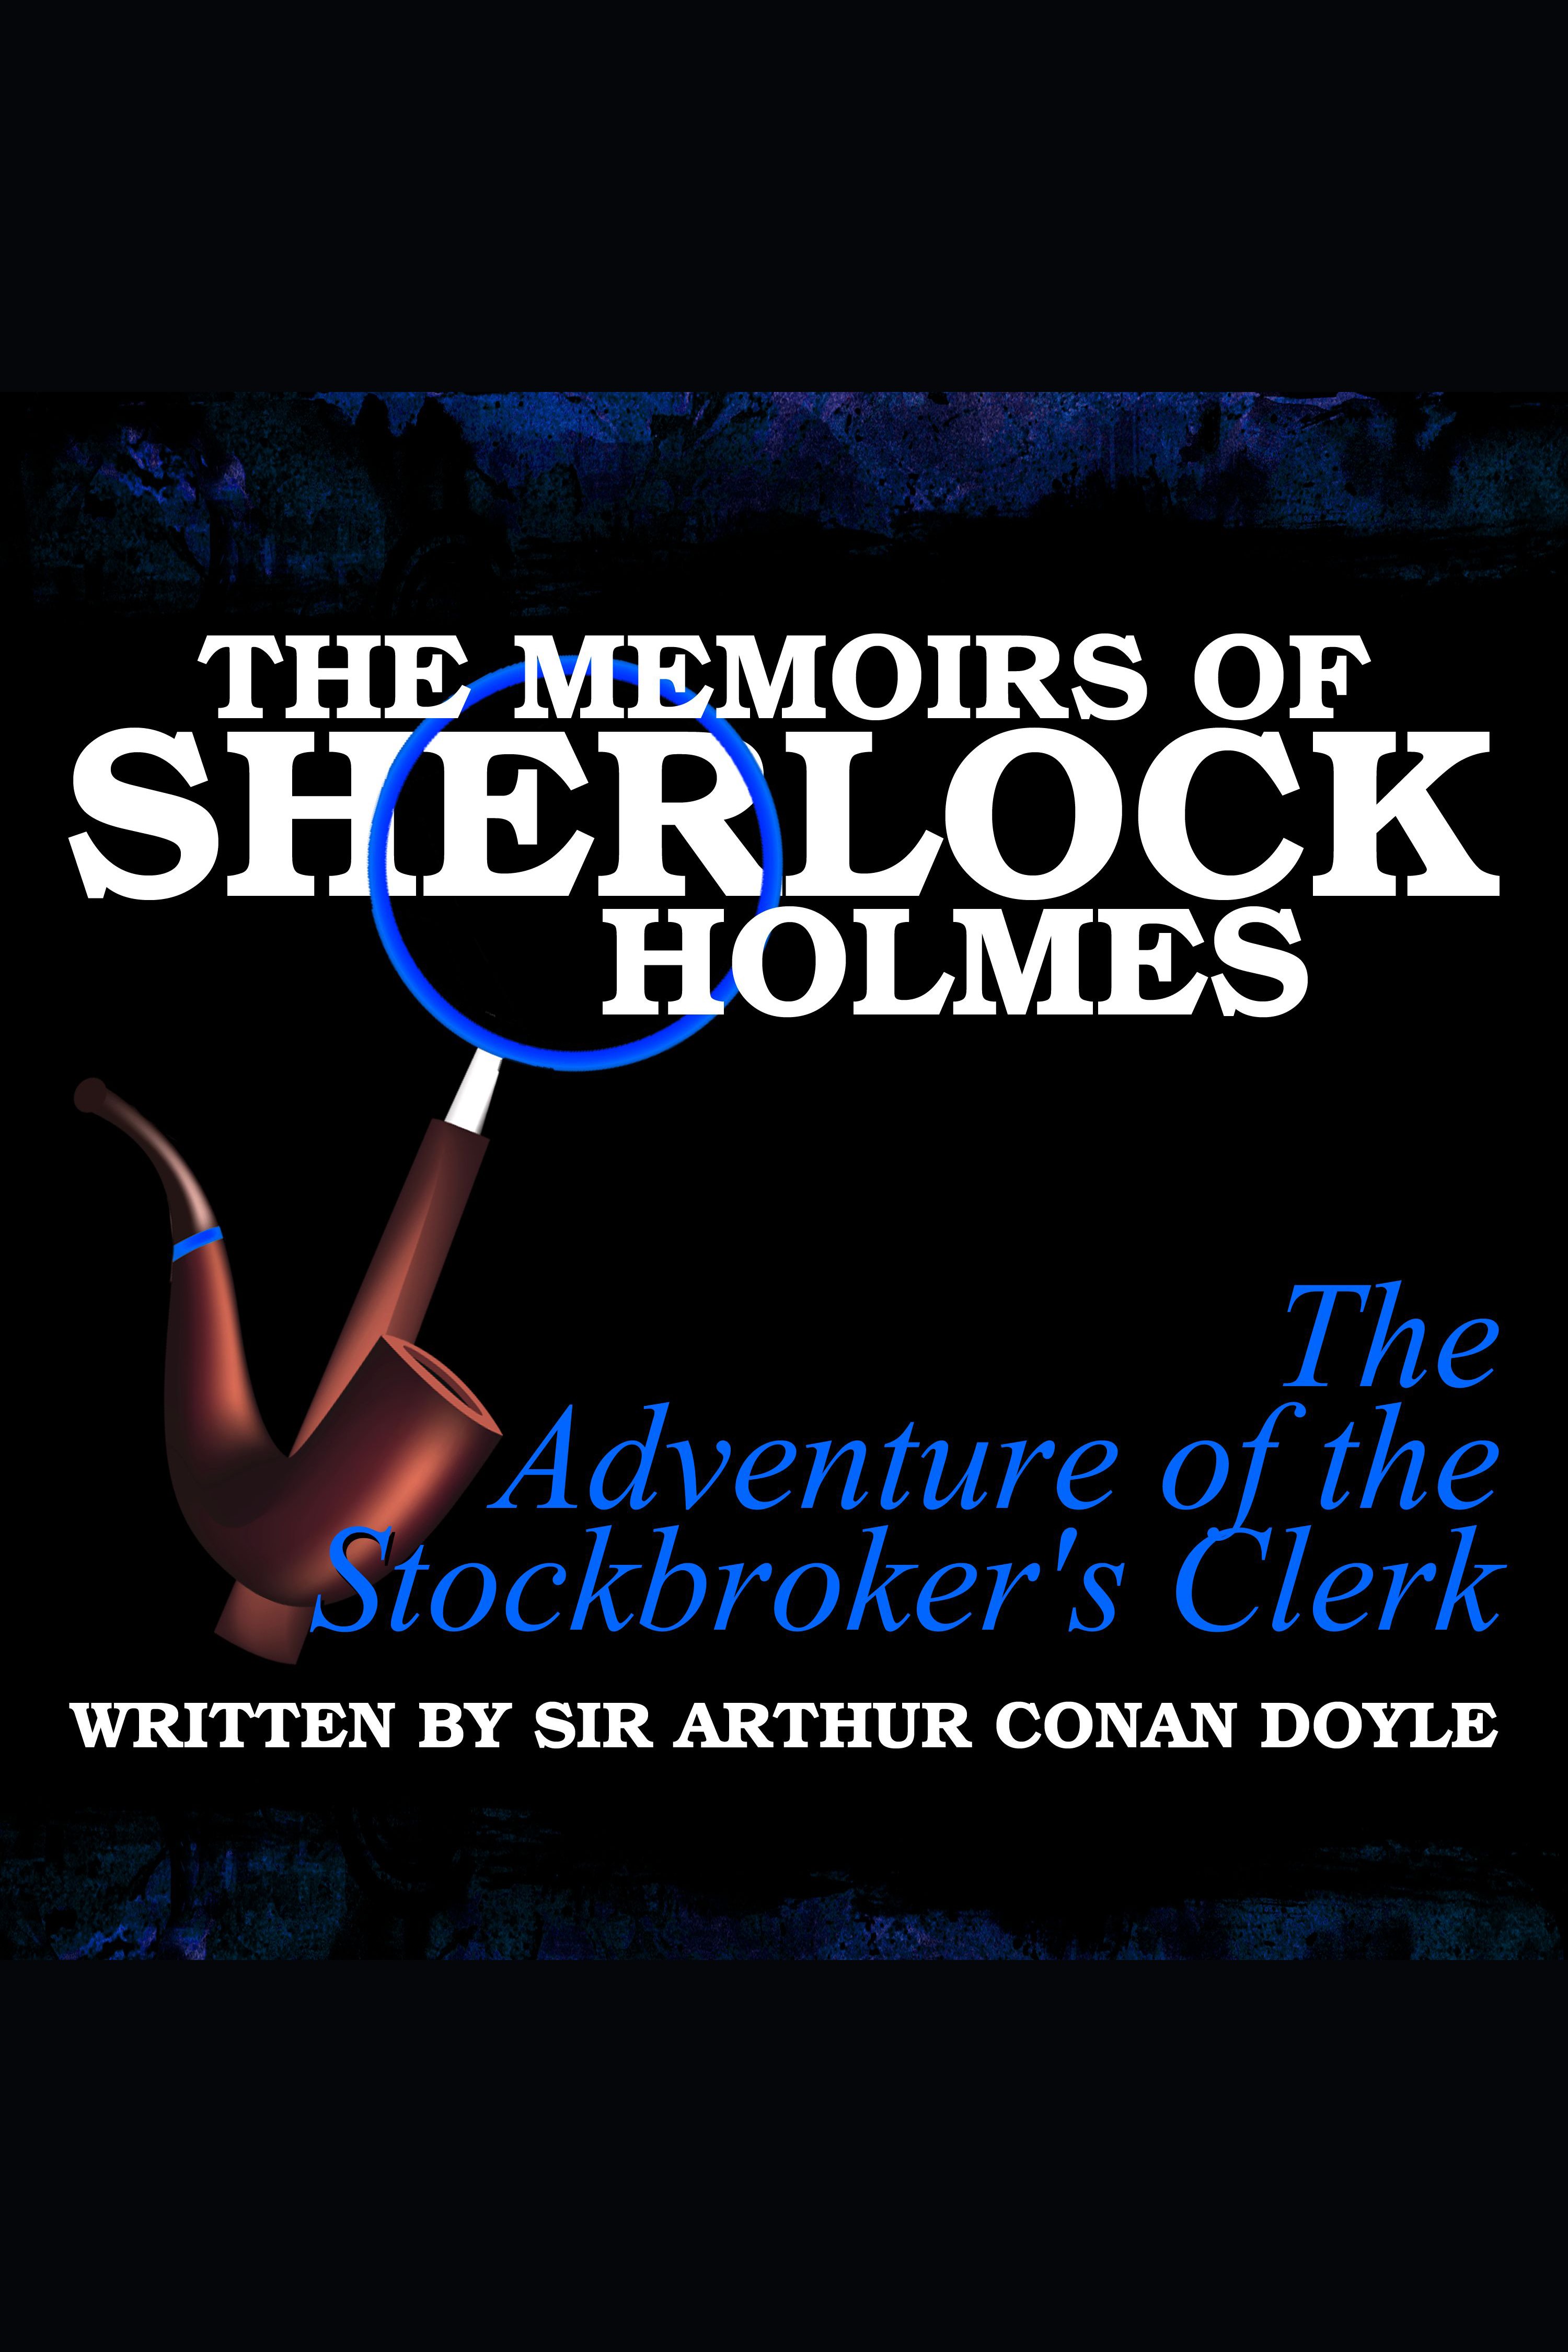 The Memoirs of Sherlock Holmes - The Adventure of the Stockbroker's Clerk cover image